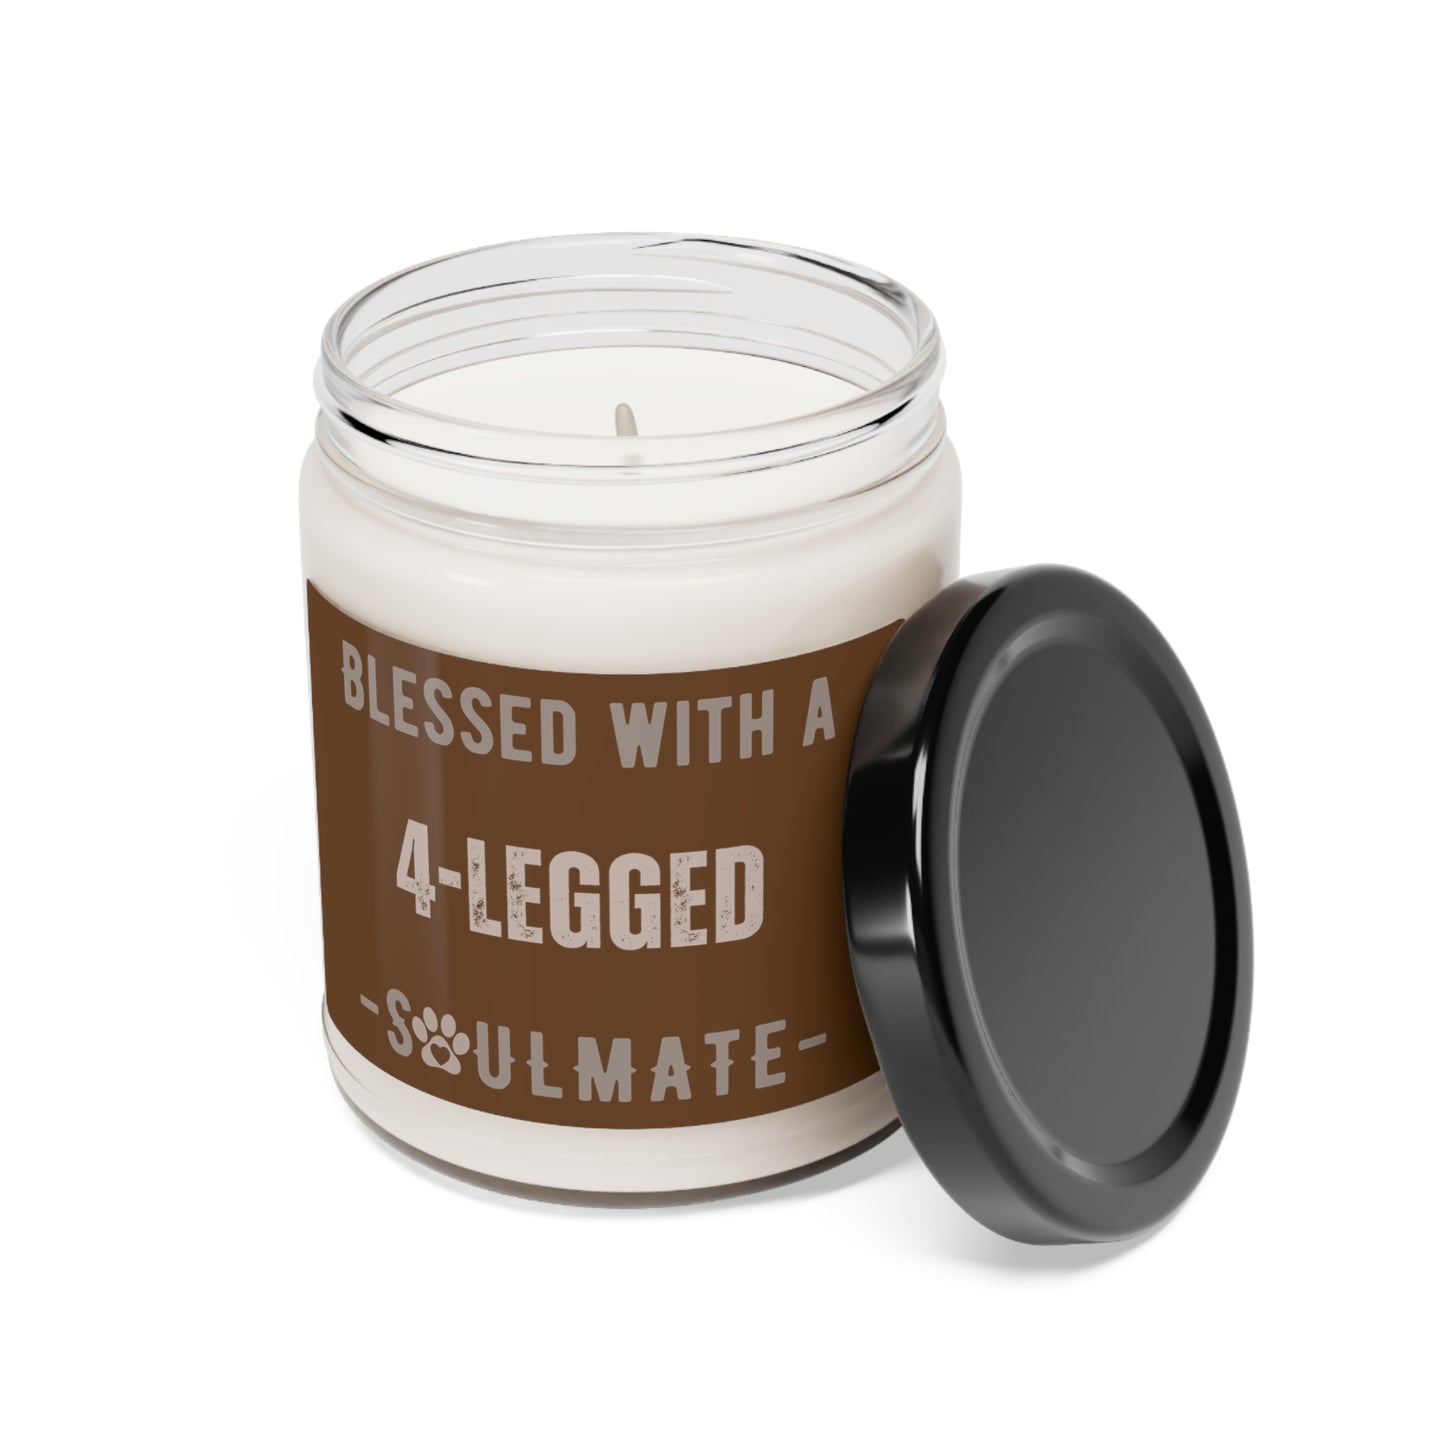 Blessed With a 4-legged Soulmate Scented Soy Candle, 9oz